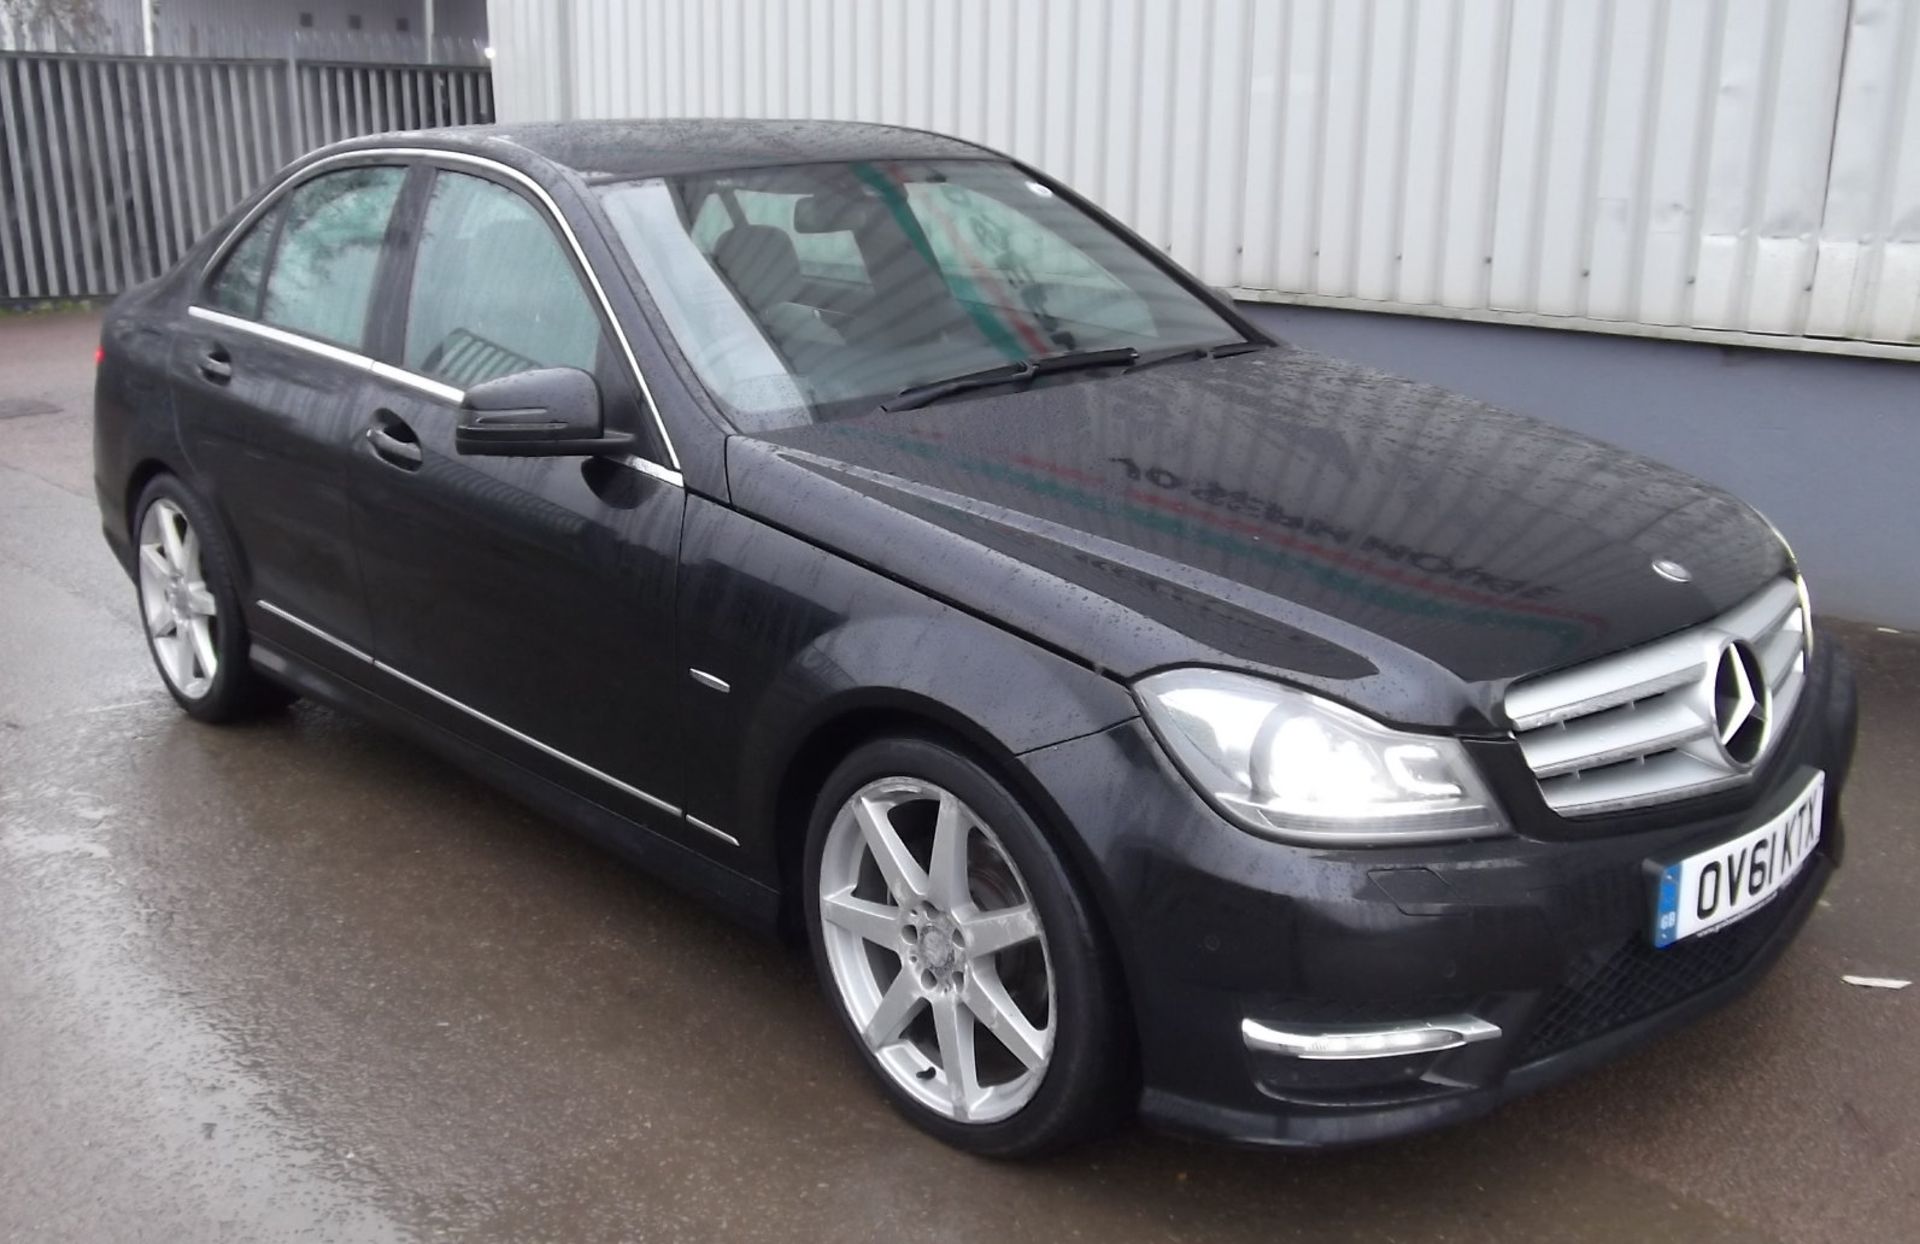 2011 Mercedes C220 CDI BlueEFFICIENCY Sport Edition 125 4dr Auto Saloon - CL505 - NO VAT ON THE HAMM - Image 15 of 21